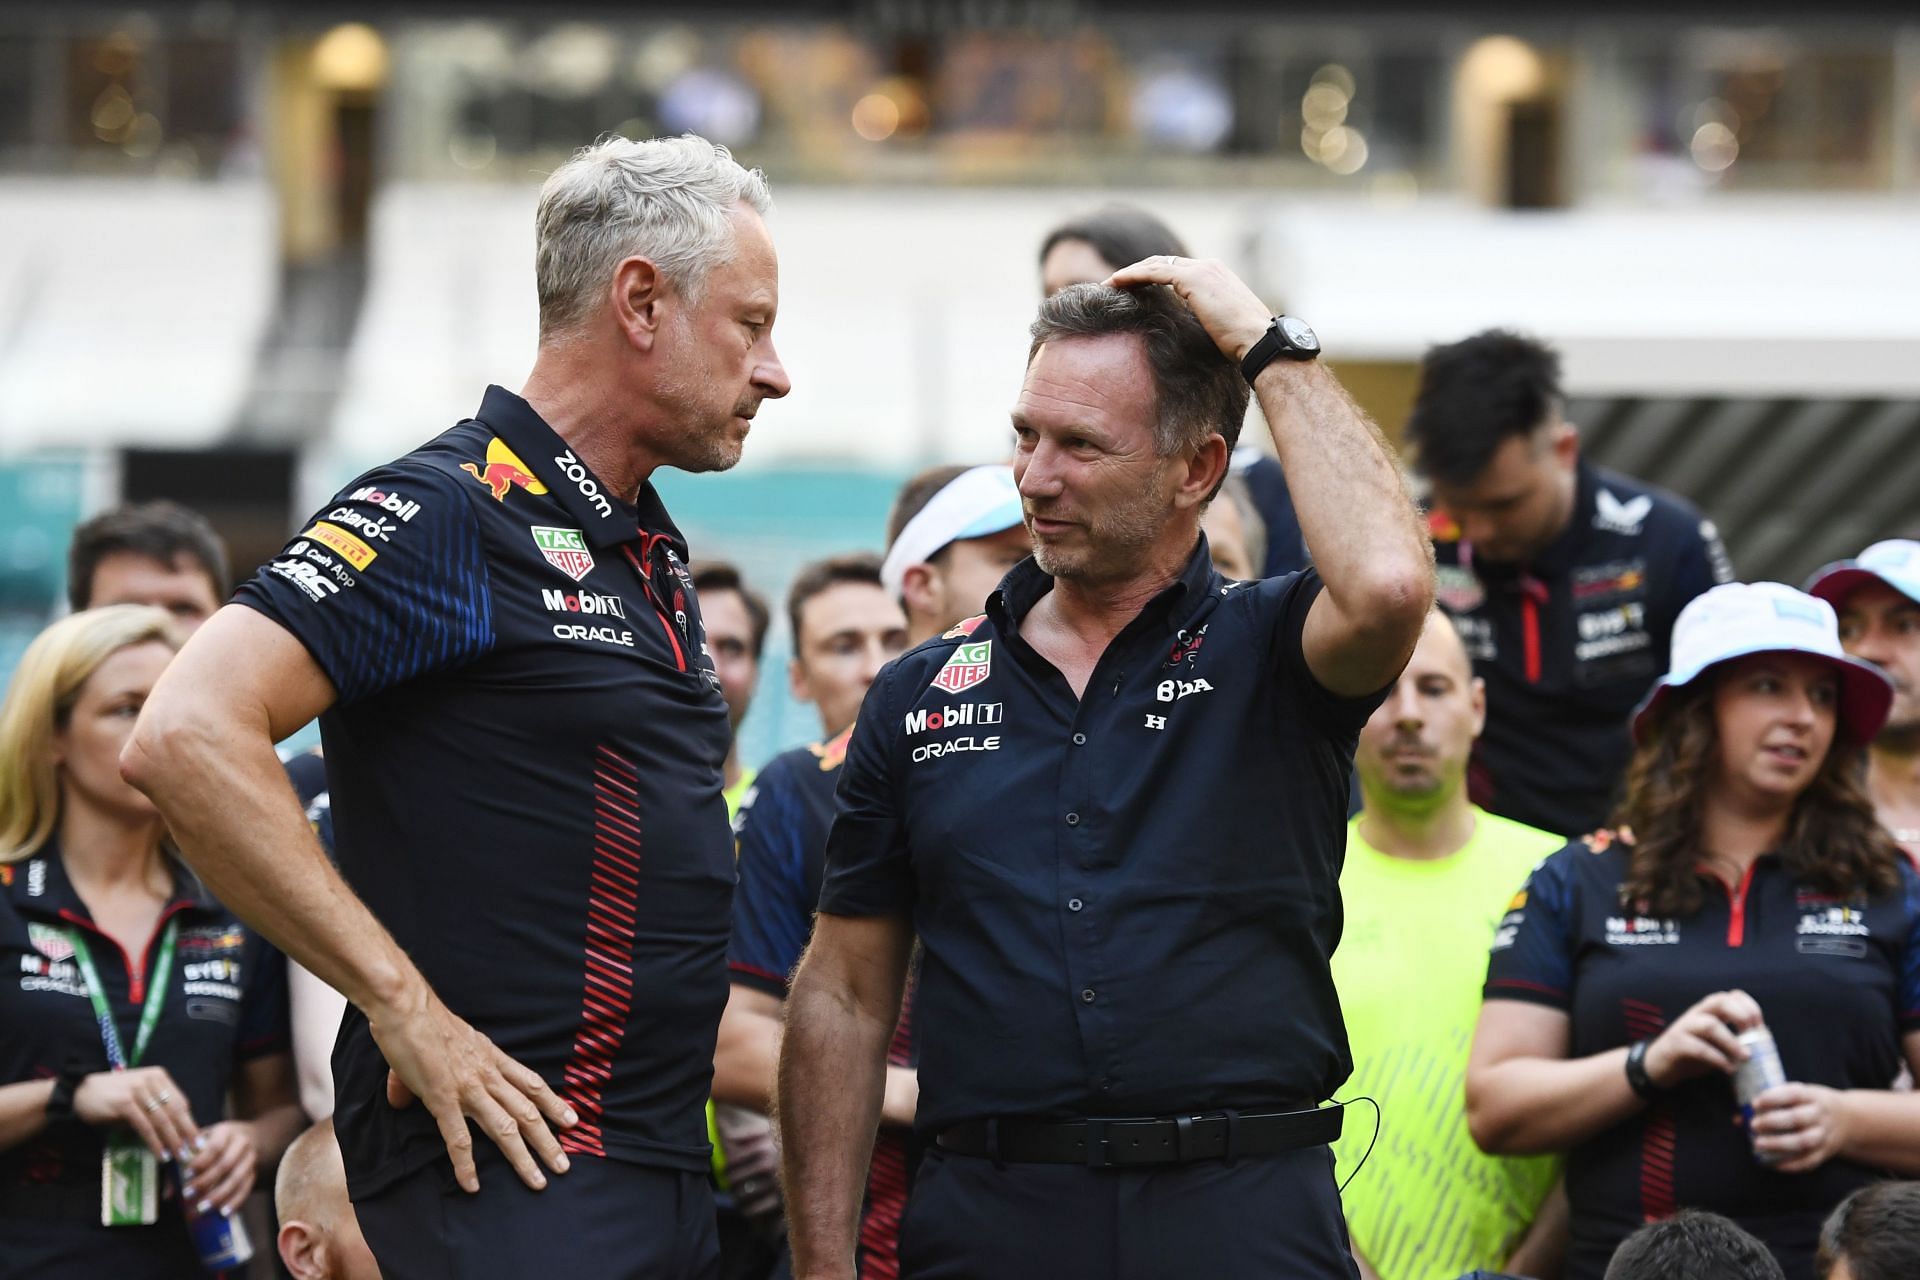 'Unimaginable': Red Bull boss reacts to claims made about the team by ...